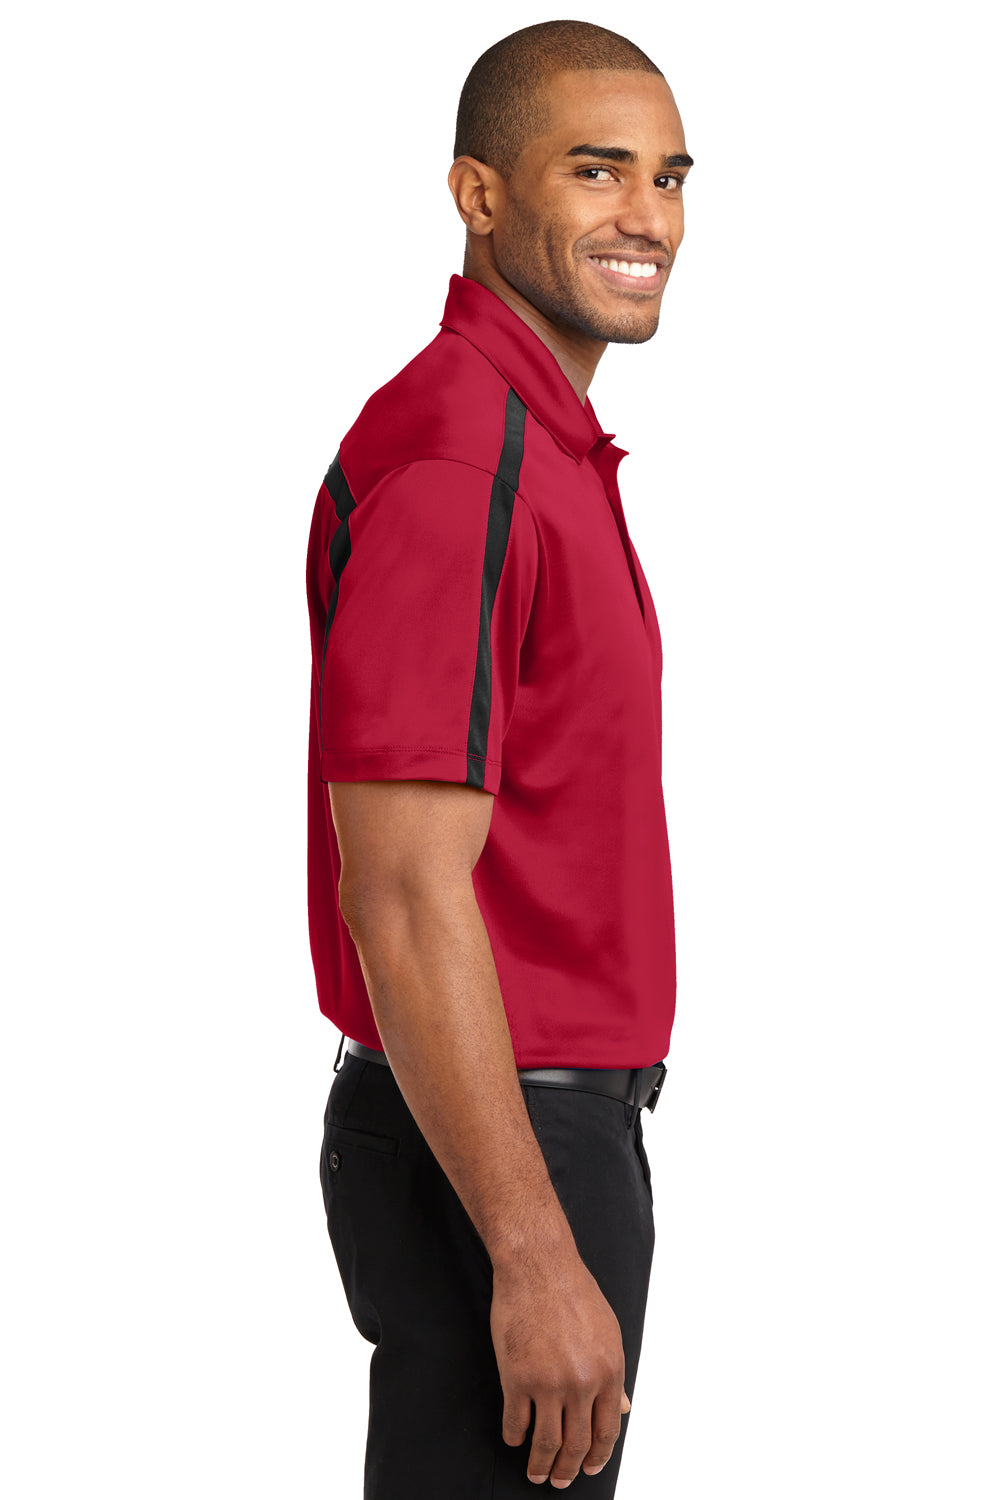 Port Authority K547 Mens Silk Touch Performance Moisture Wicking Short Sleeve Polo Shirt Red/Black Side